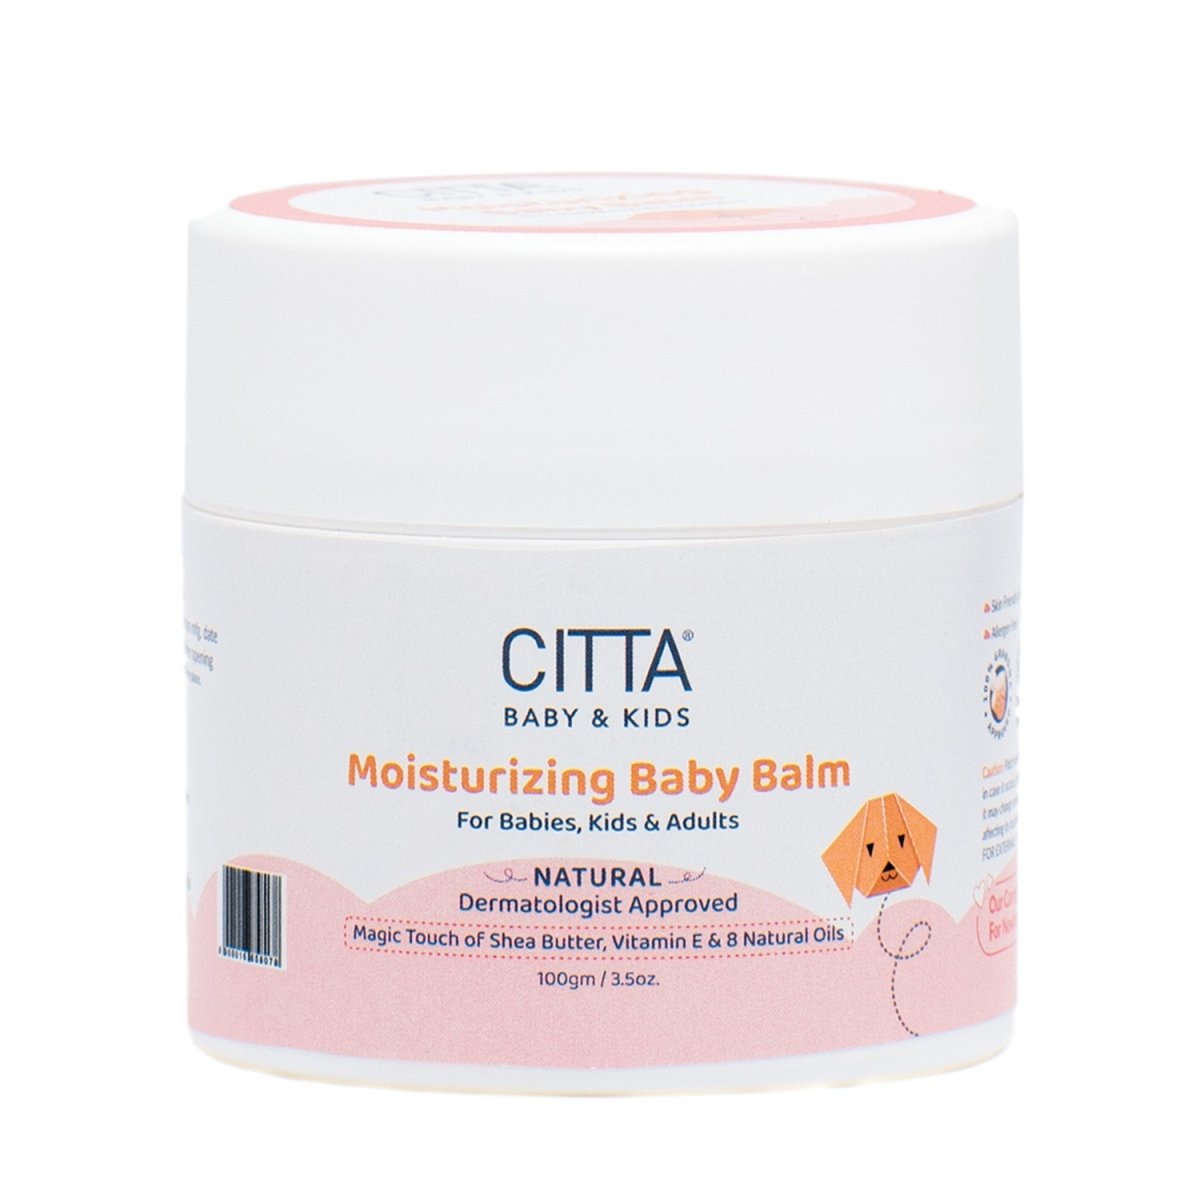 Citta Natural Moisturizing Baby Balm For Body And Face With Shea Butter & Vitamin E | 100 gm - S-Balm100